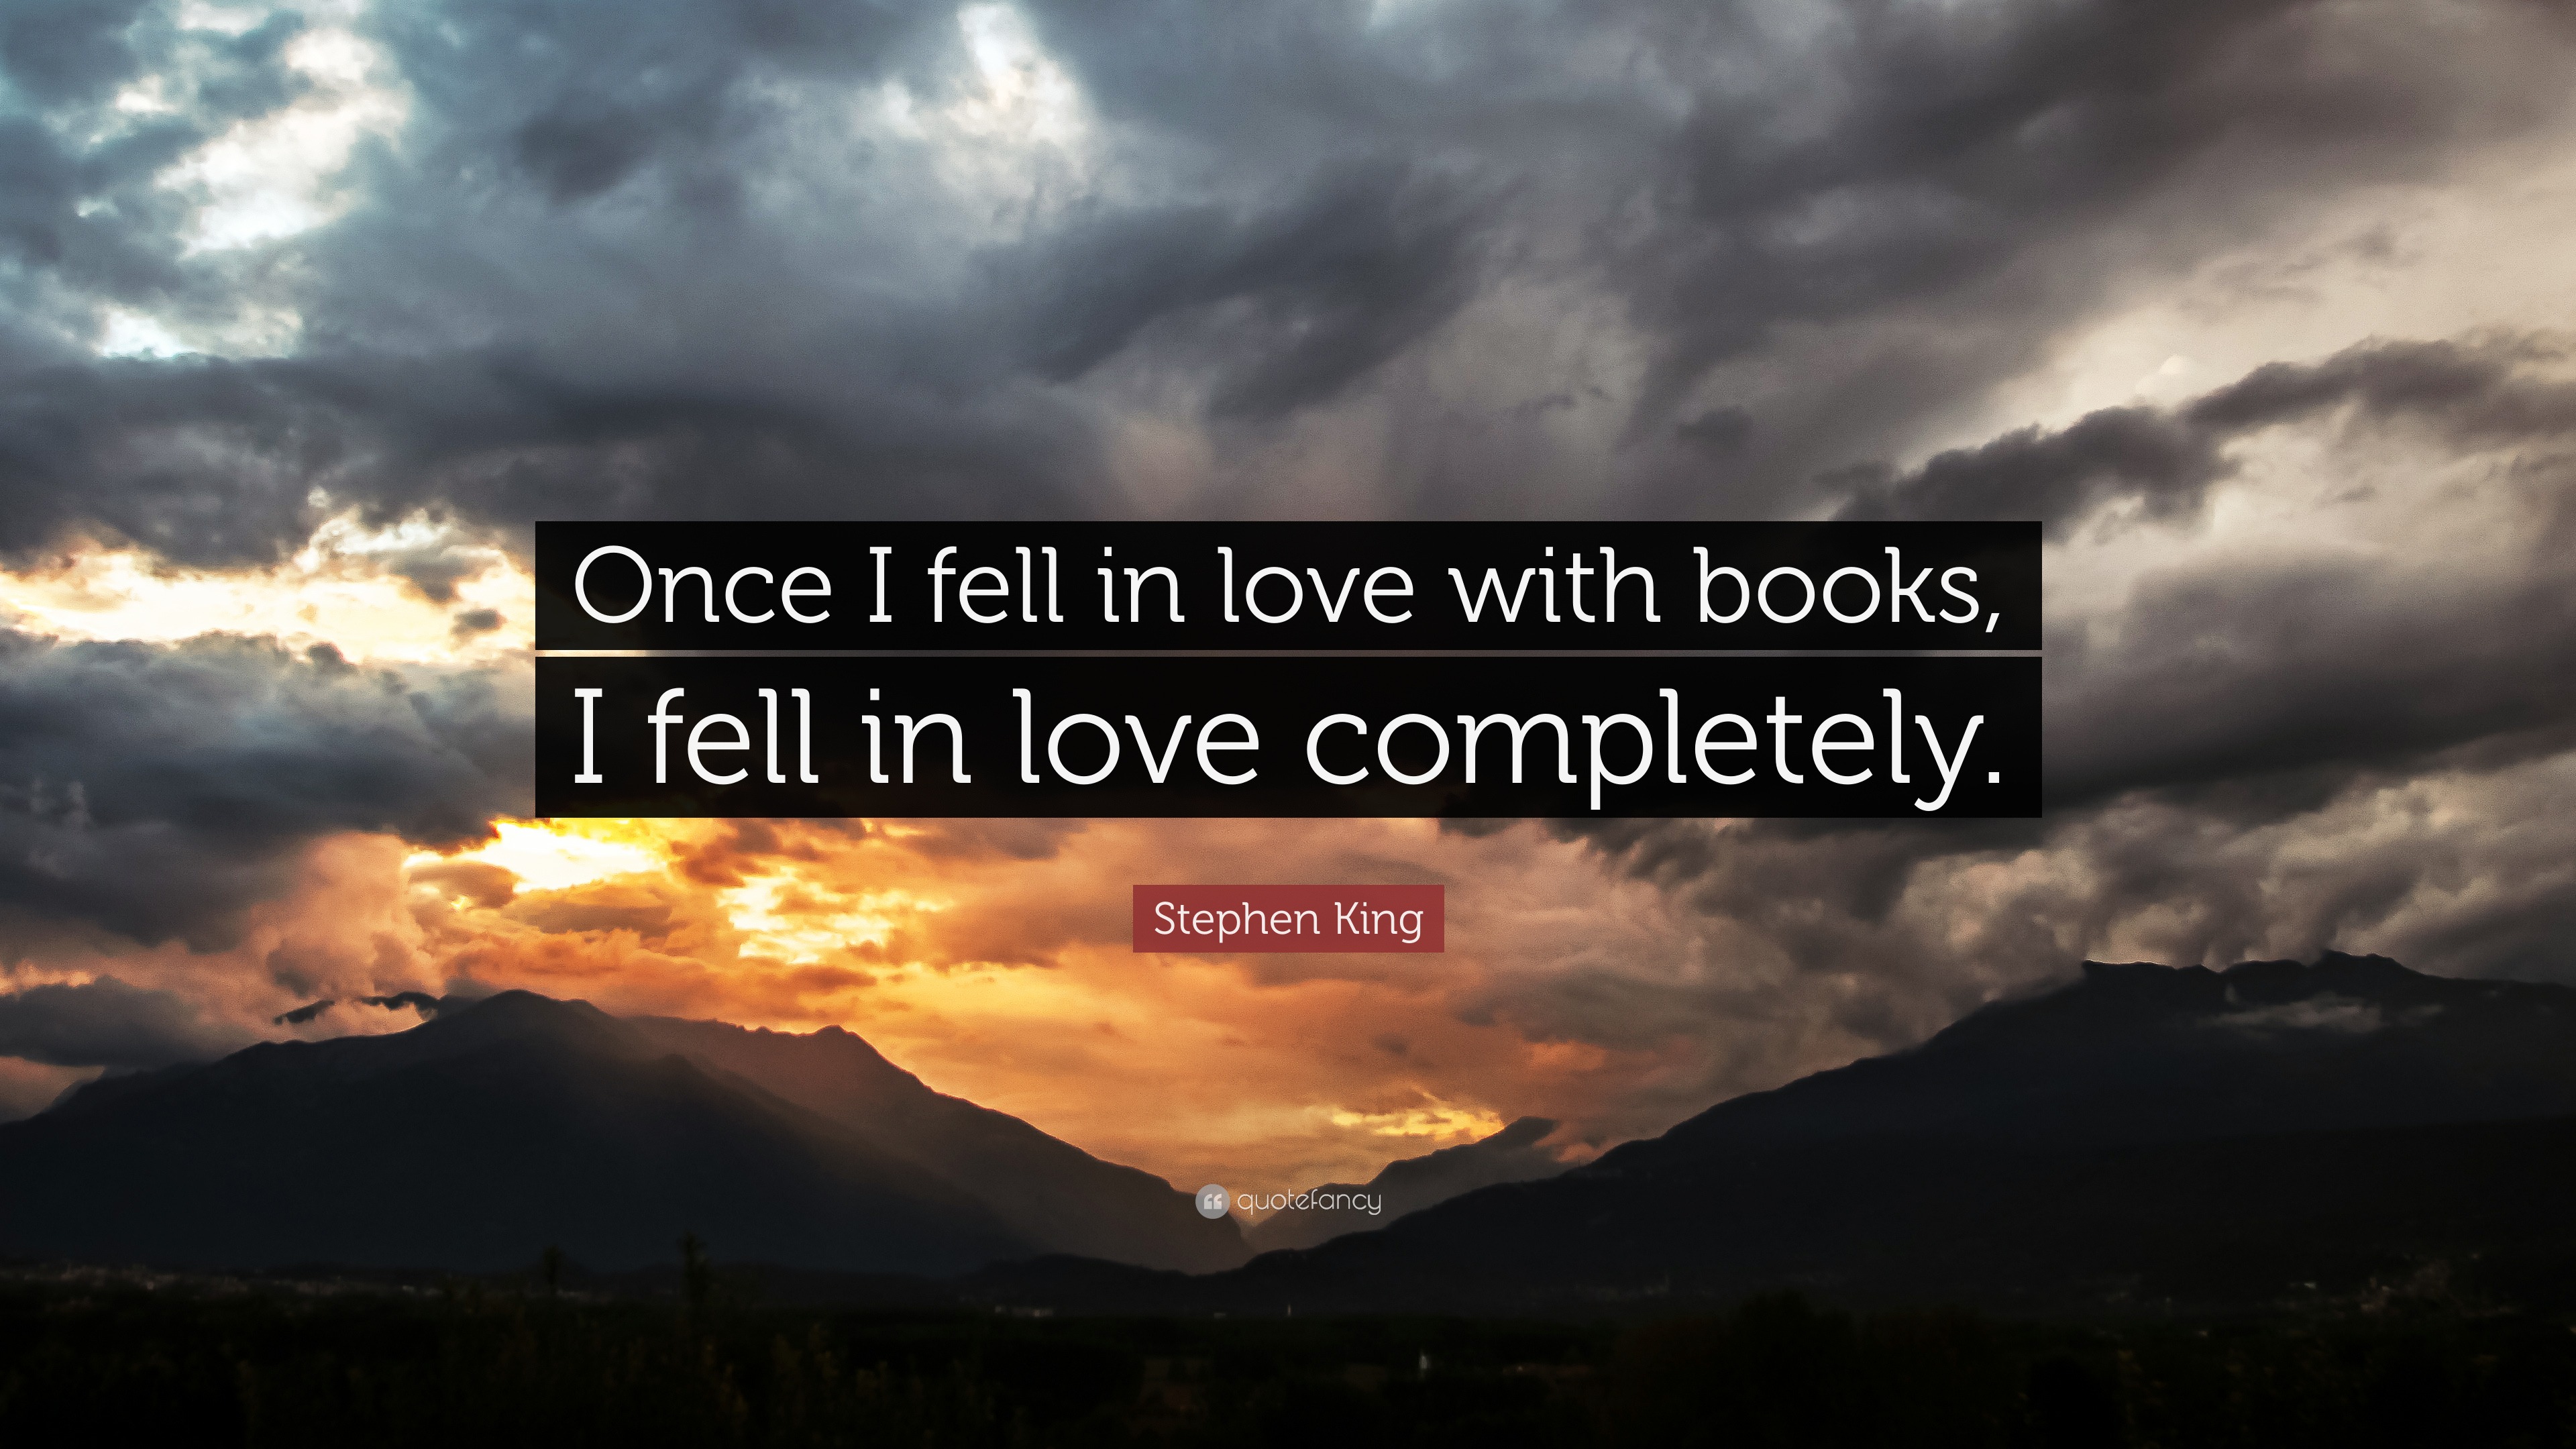 Stephen King Quote ce I fell in love with books I fell in